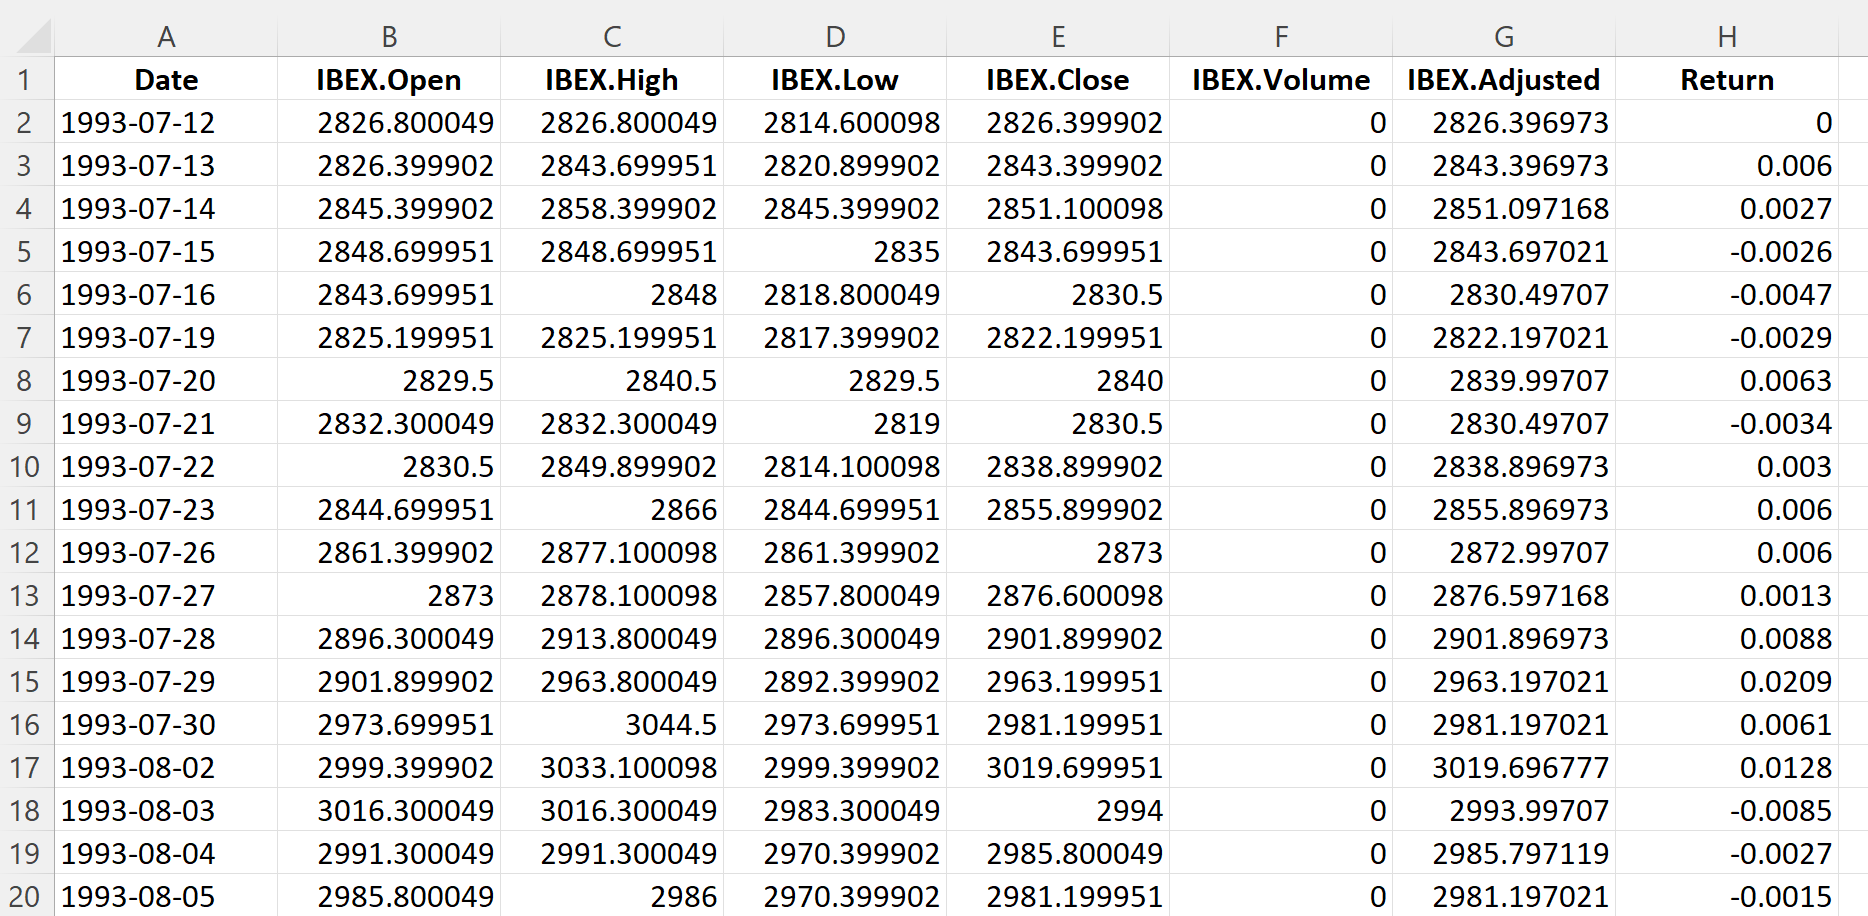 Top of the file for the IBEX 35 index data